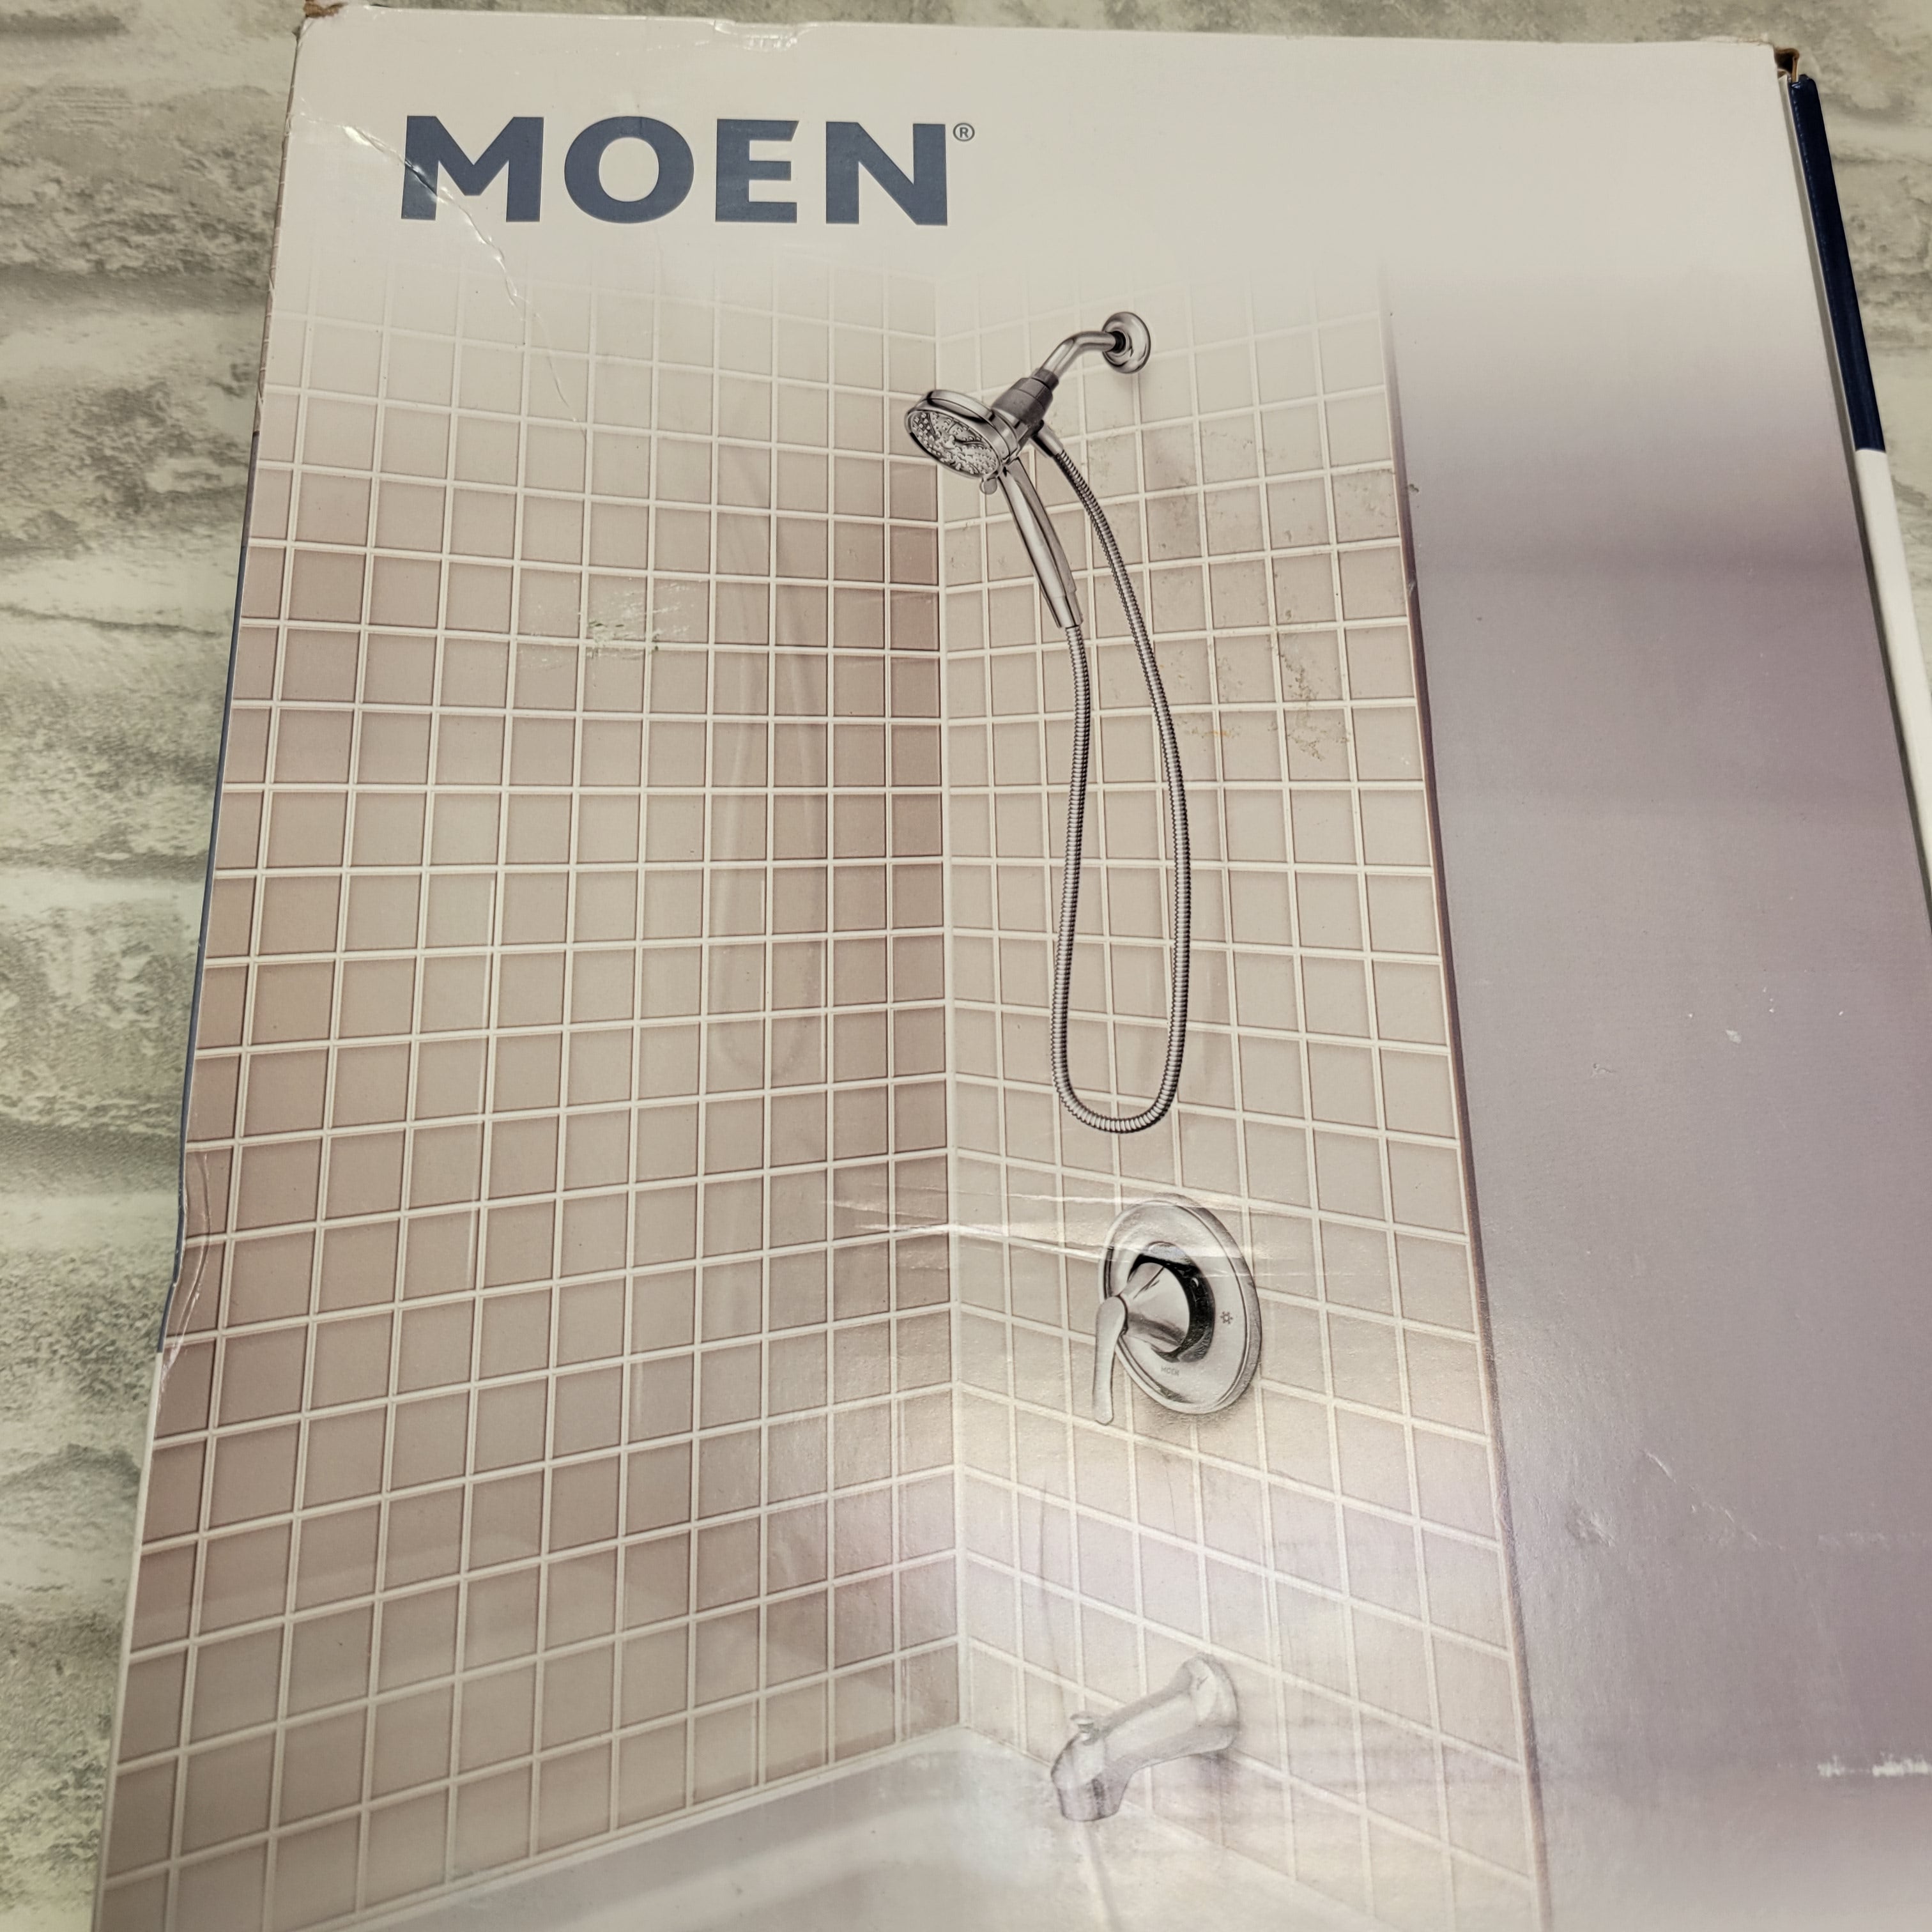 MOEN Darcy w/ Magnetix Single-Handle Tub/Shower Faucet - Chrome (Valve Included) (7626873209070)